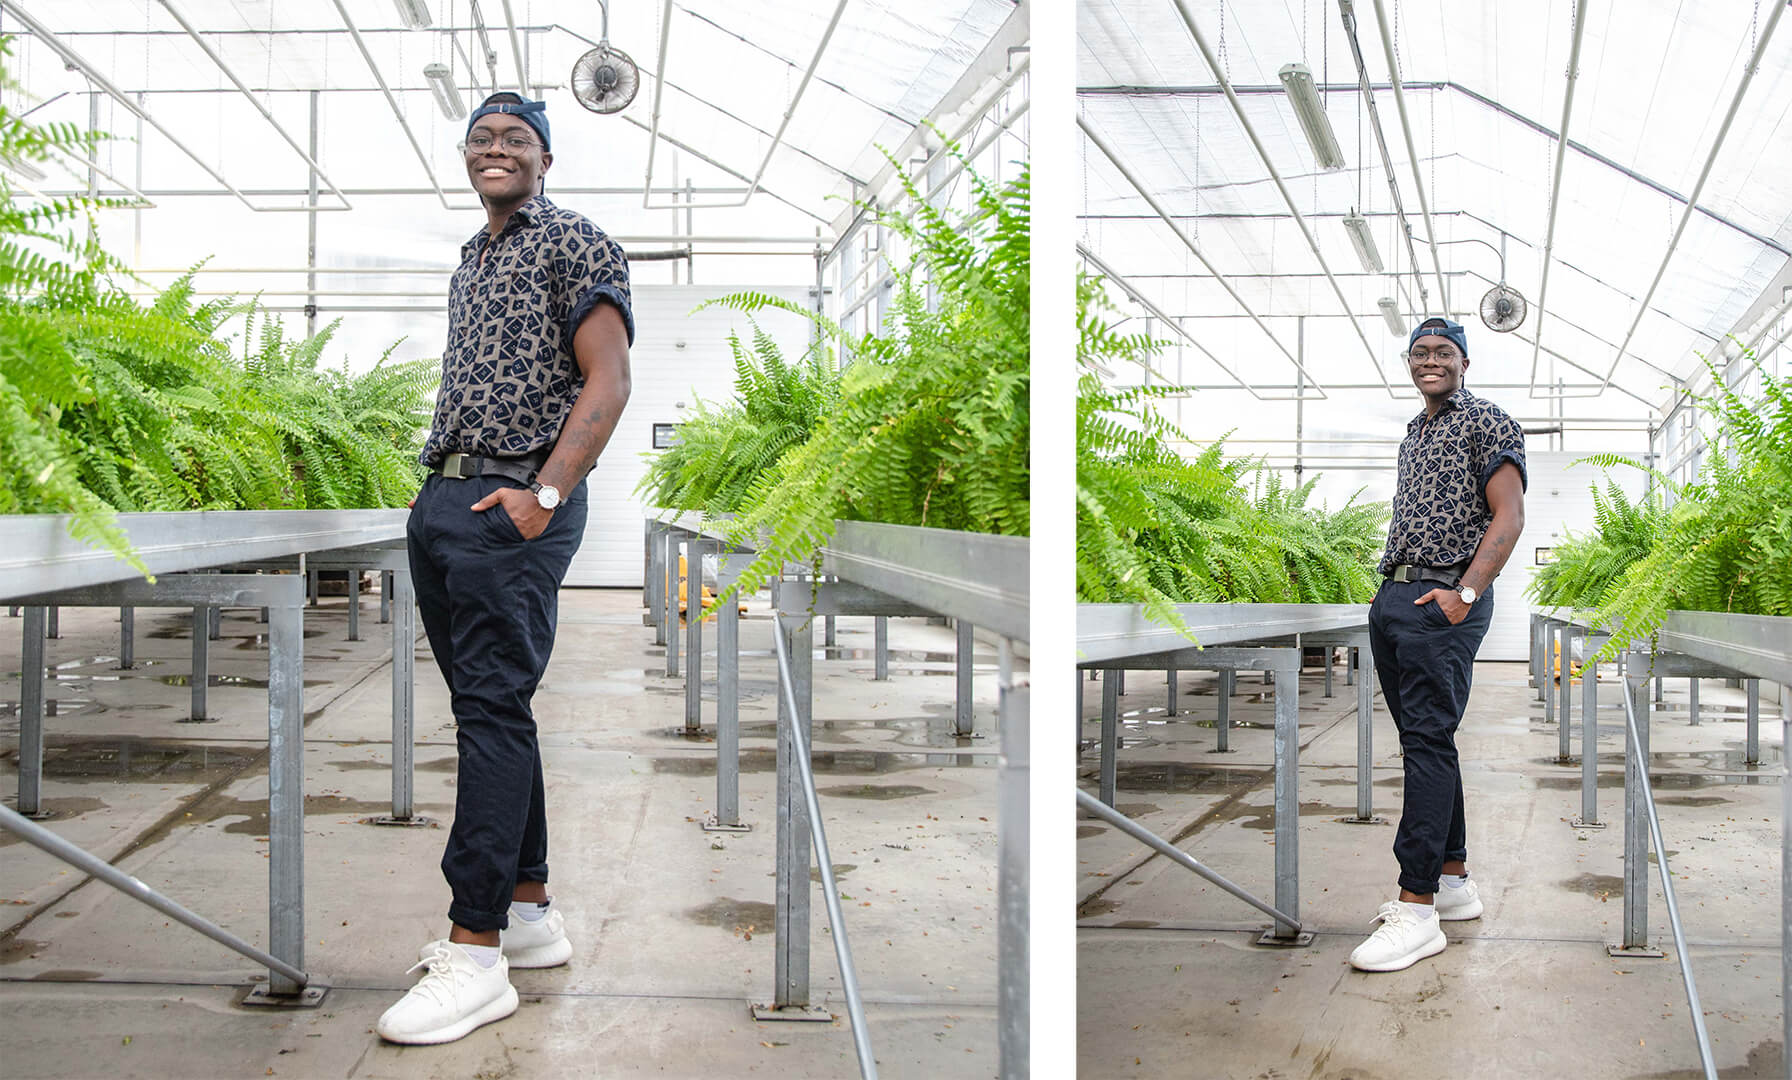 Kristopher Phillips, a member of the LGBTQ community, poses in greenhouse